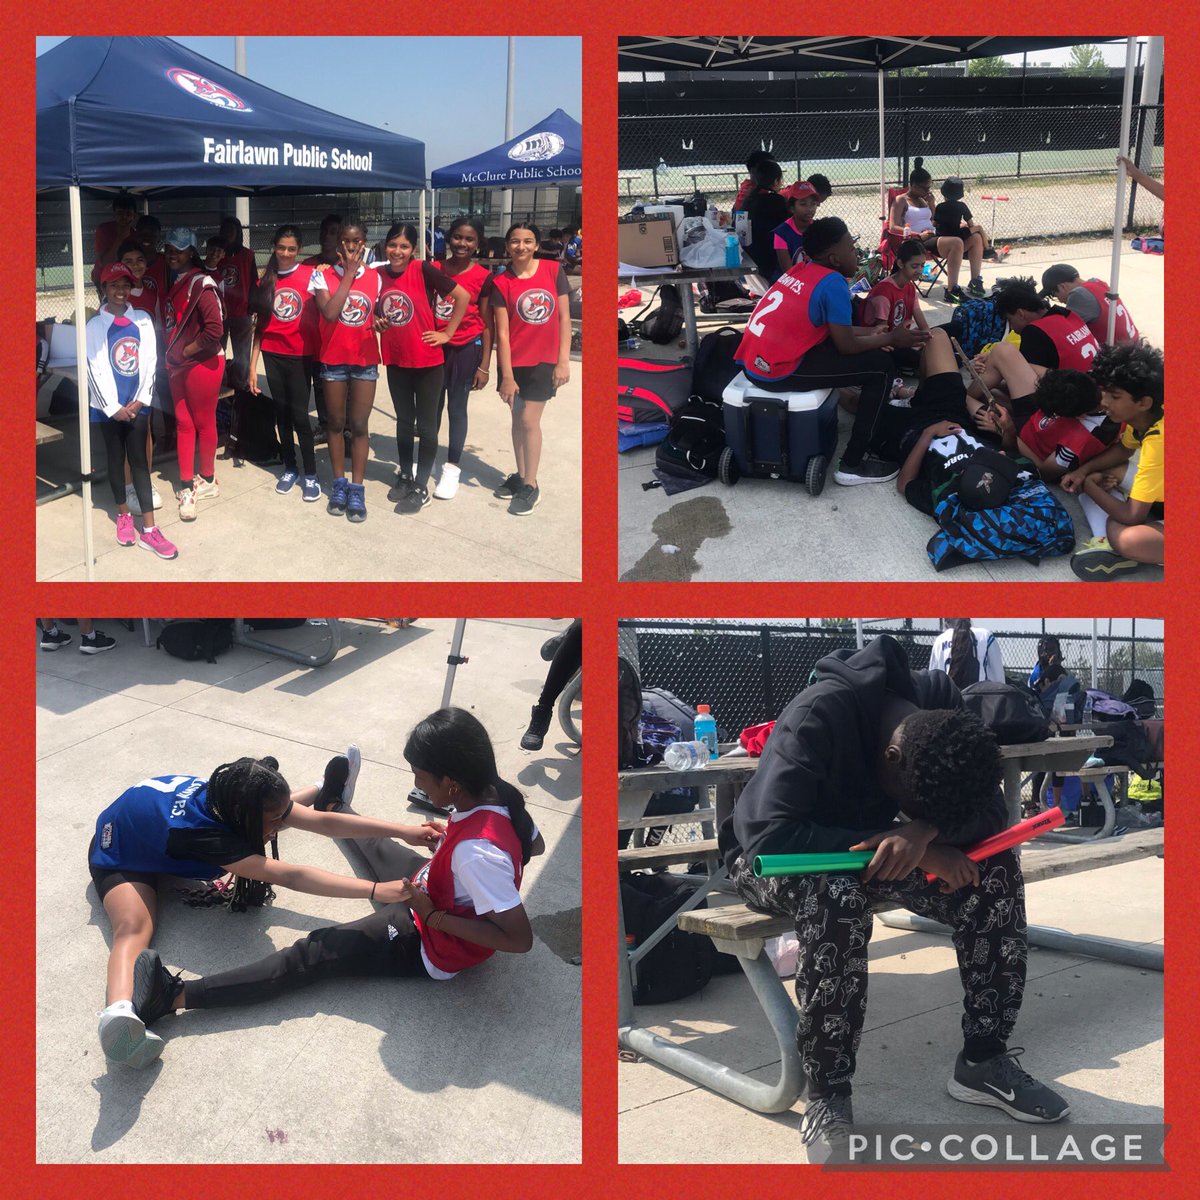 A great day outdoors in the ☀️ seeing all the talent at our last event of the year! Thank you to everyone involved who made this Track and Field Meet a success! @hpe4pdsb @npphea @ETPHEA @PeelSchools @FairlawnPSPDSB